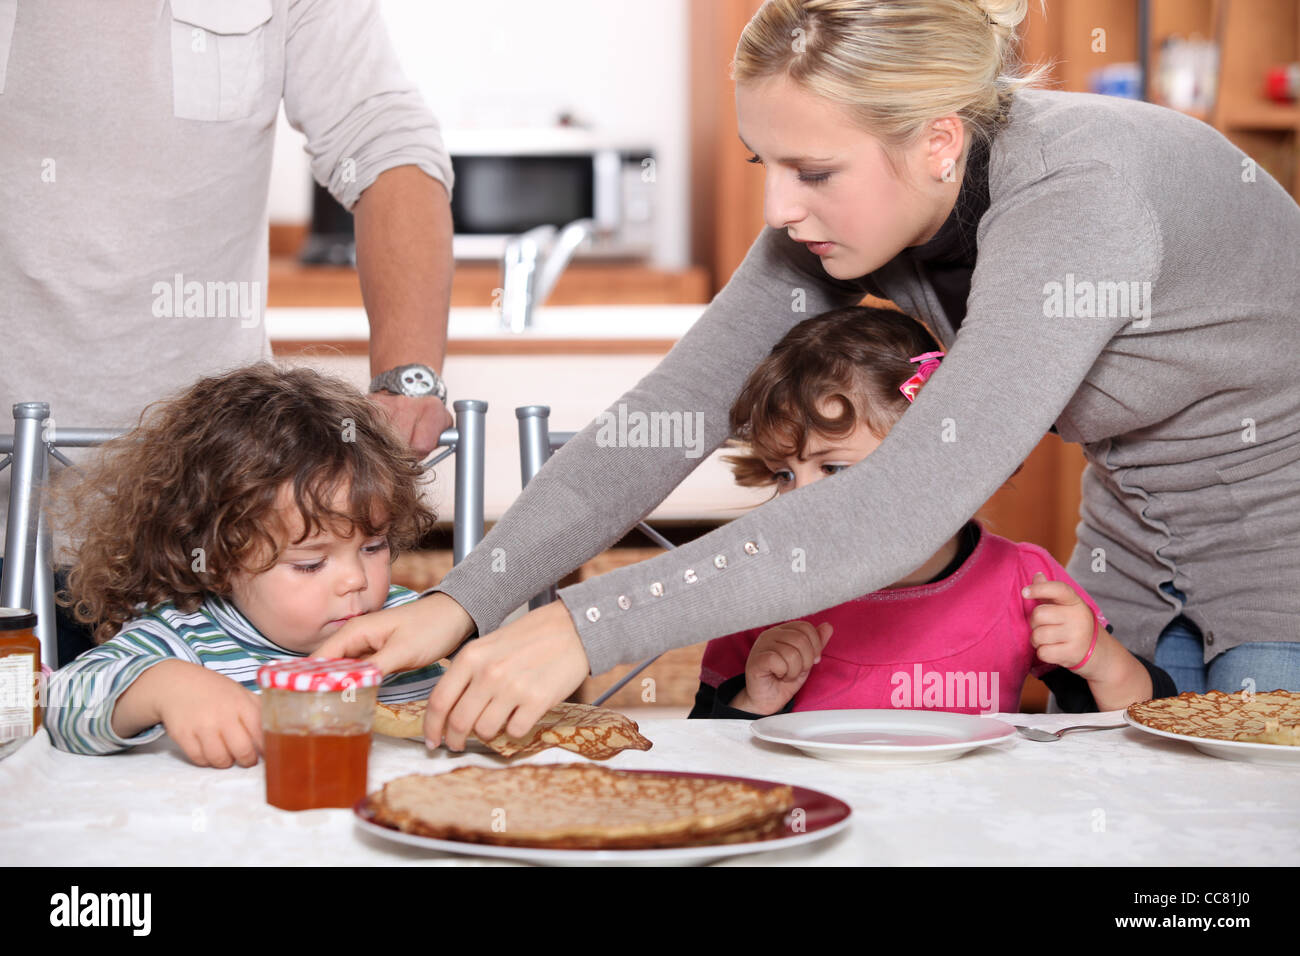 Children eating crepes Stock Photo